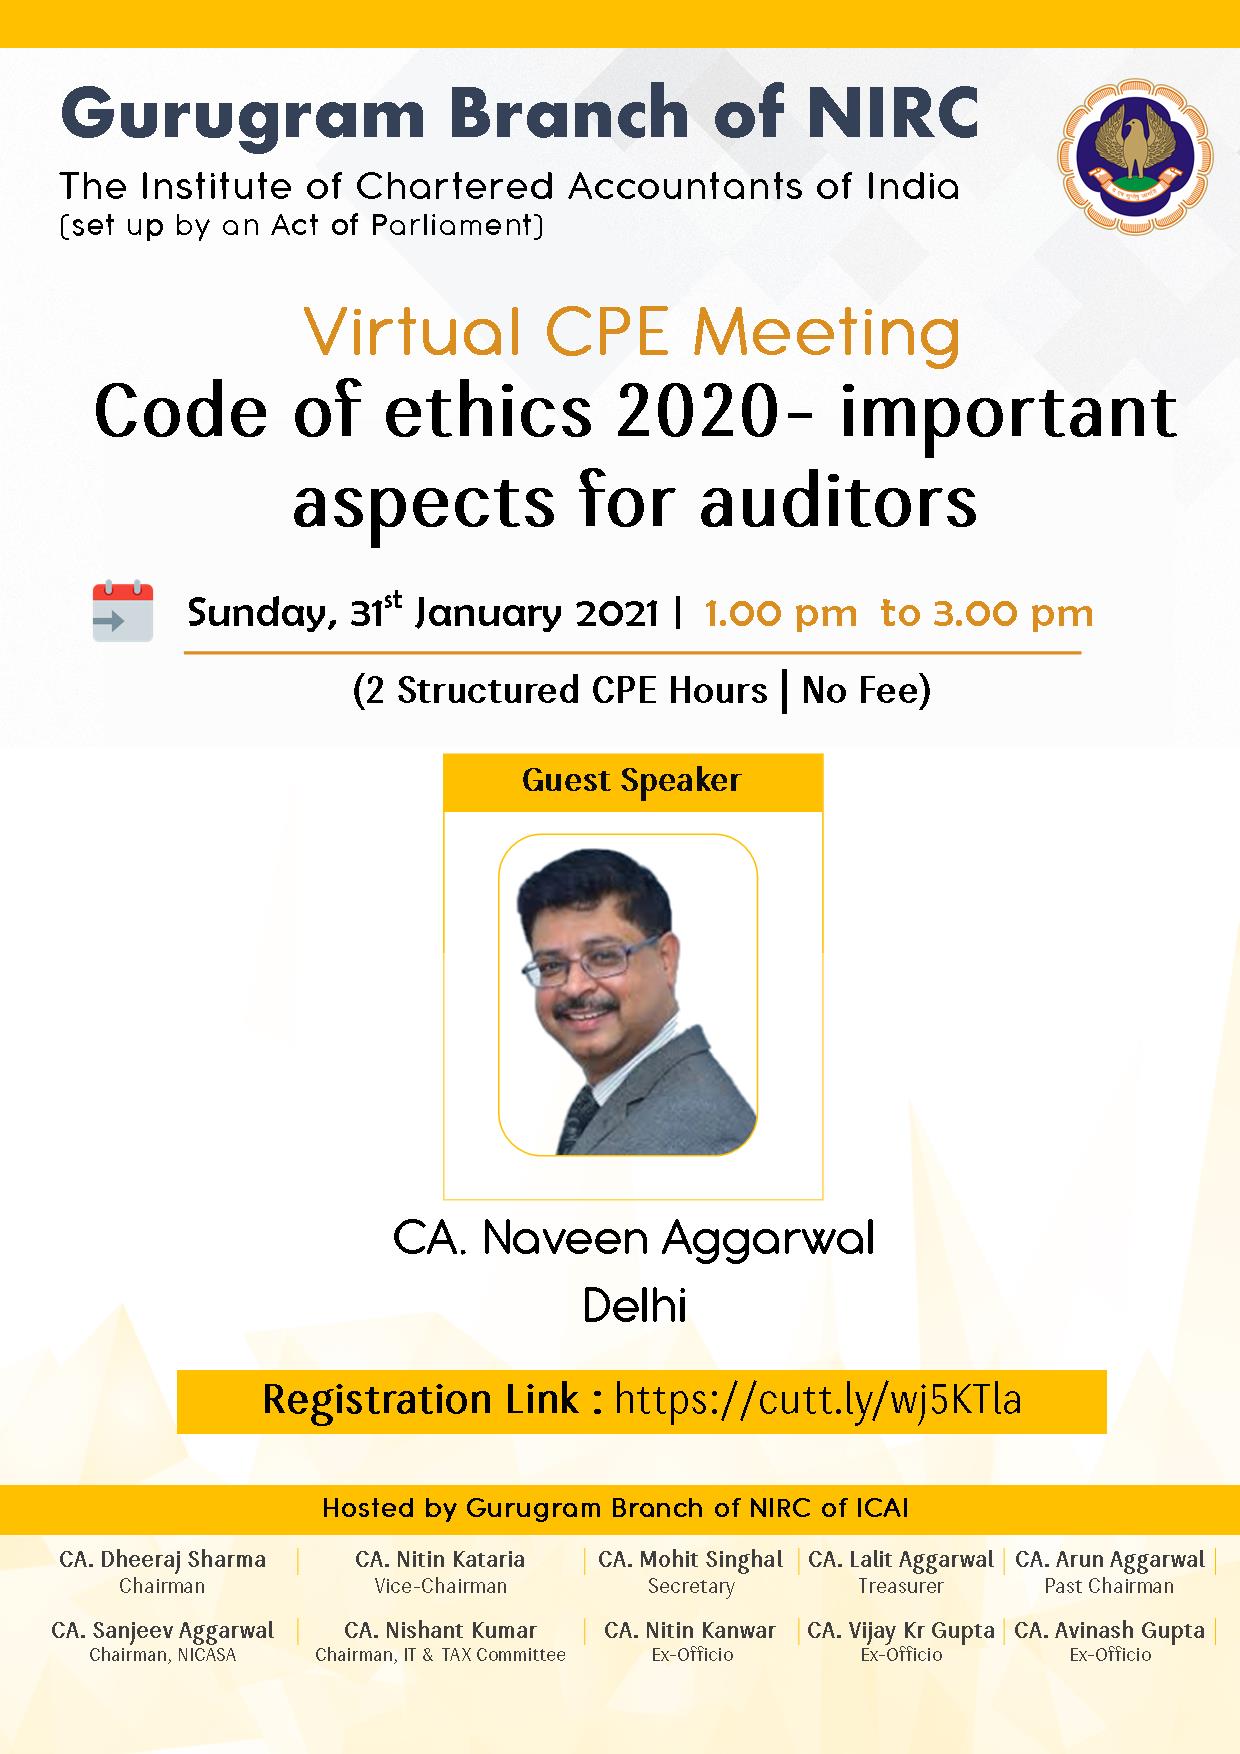 Virtual CPE Meeting on Code of Ethics 2020- Important Aspects for Auditors